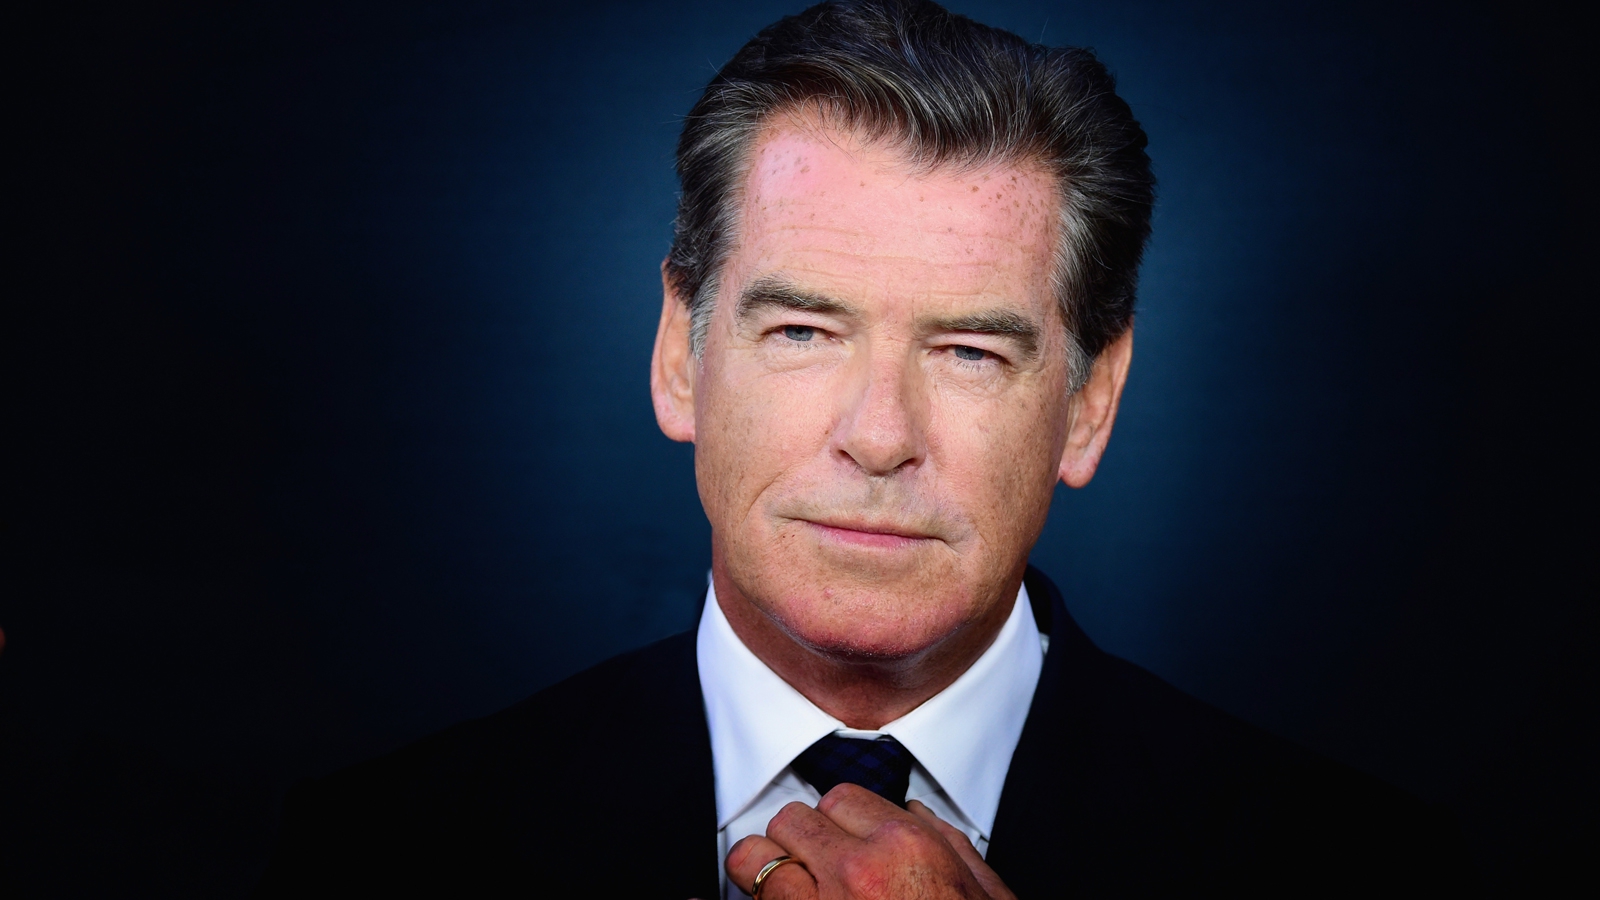 Pierce Brosnan on James Bond, his childhood in Ireland and his  environmental activism - arts24